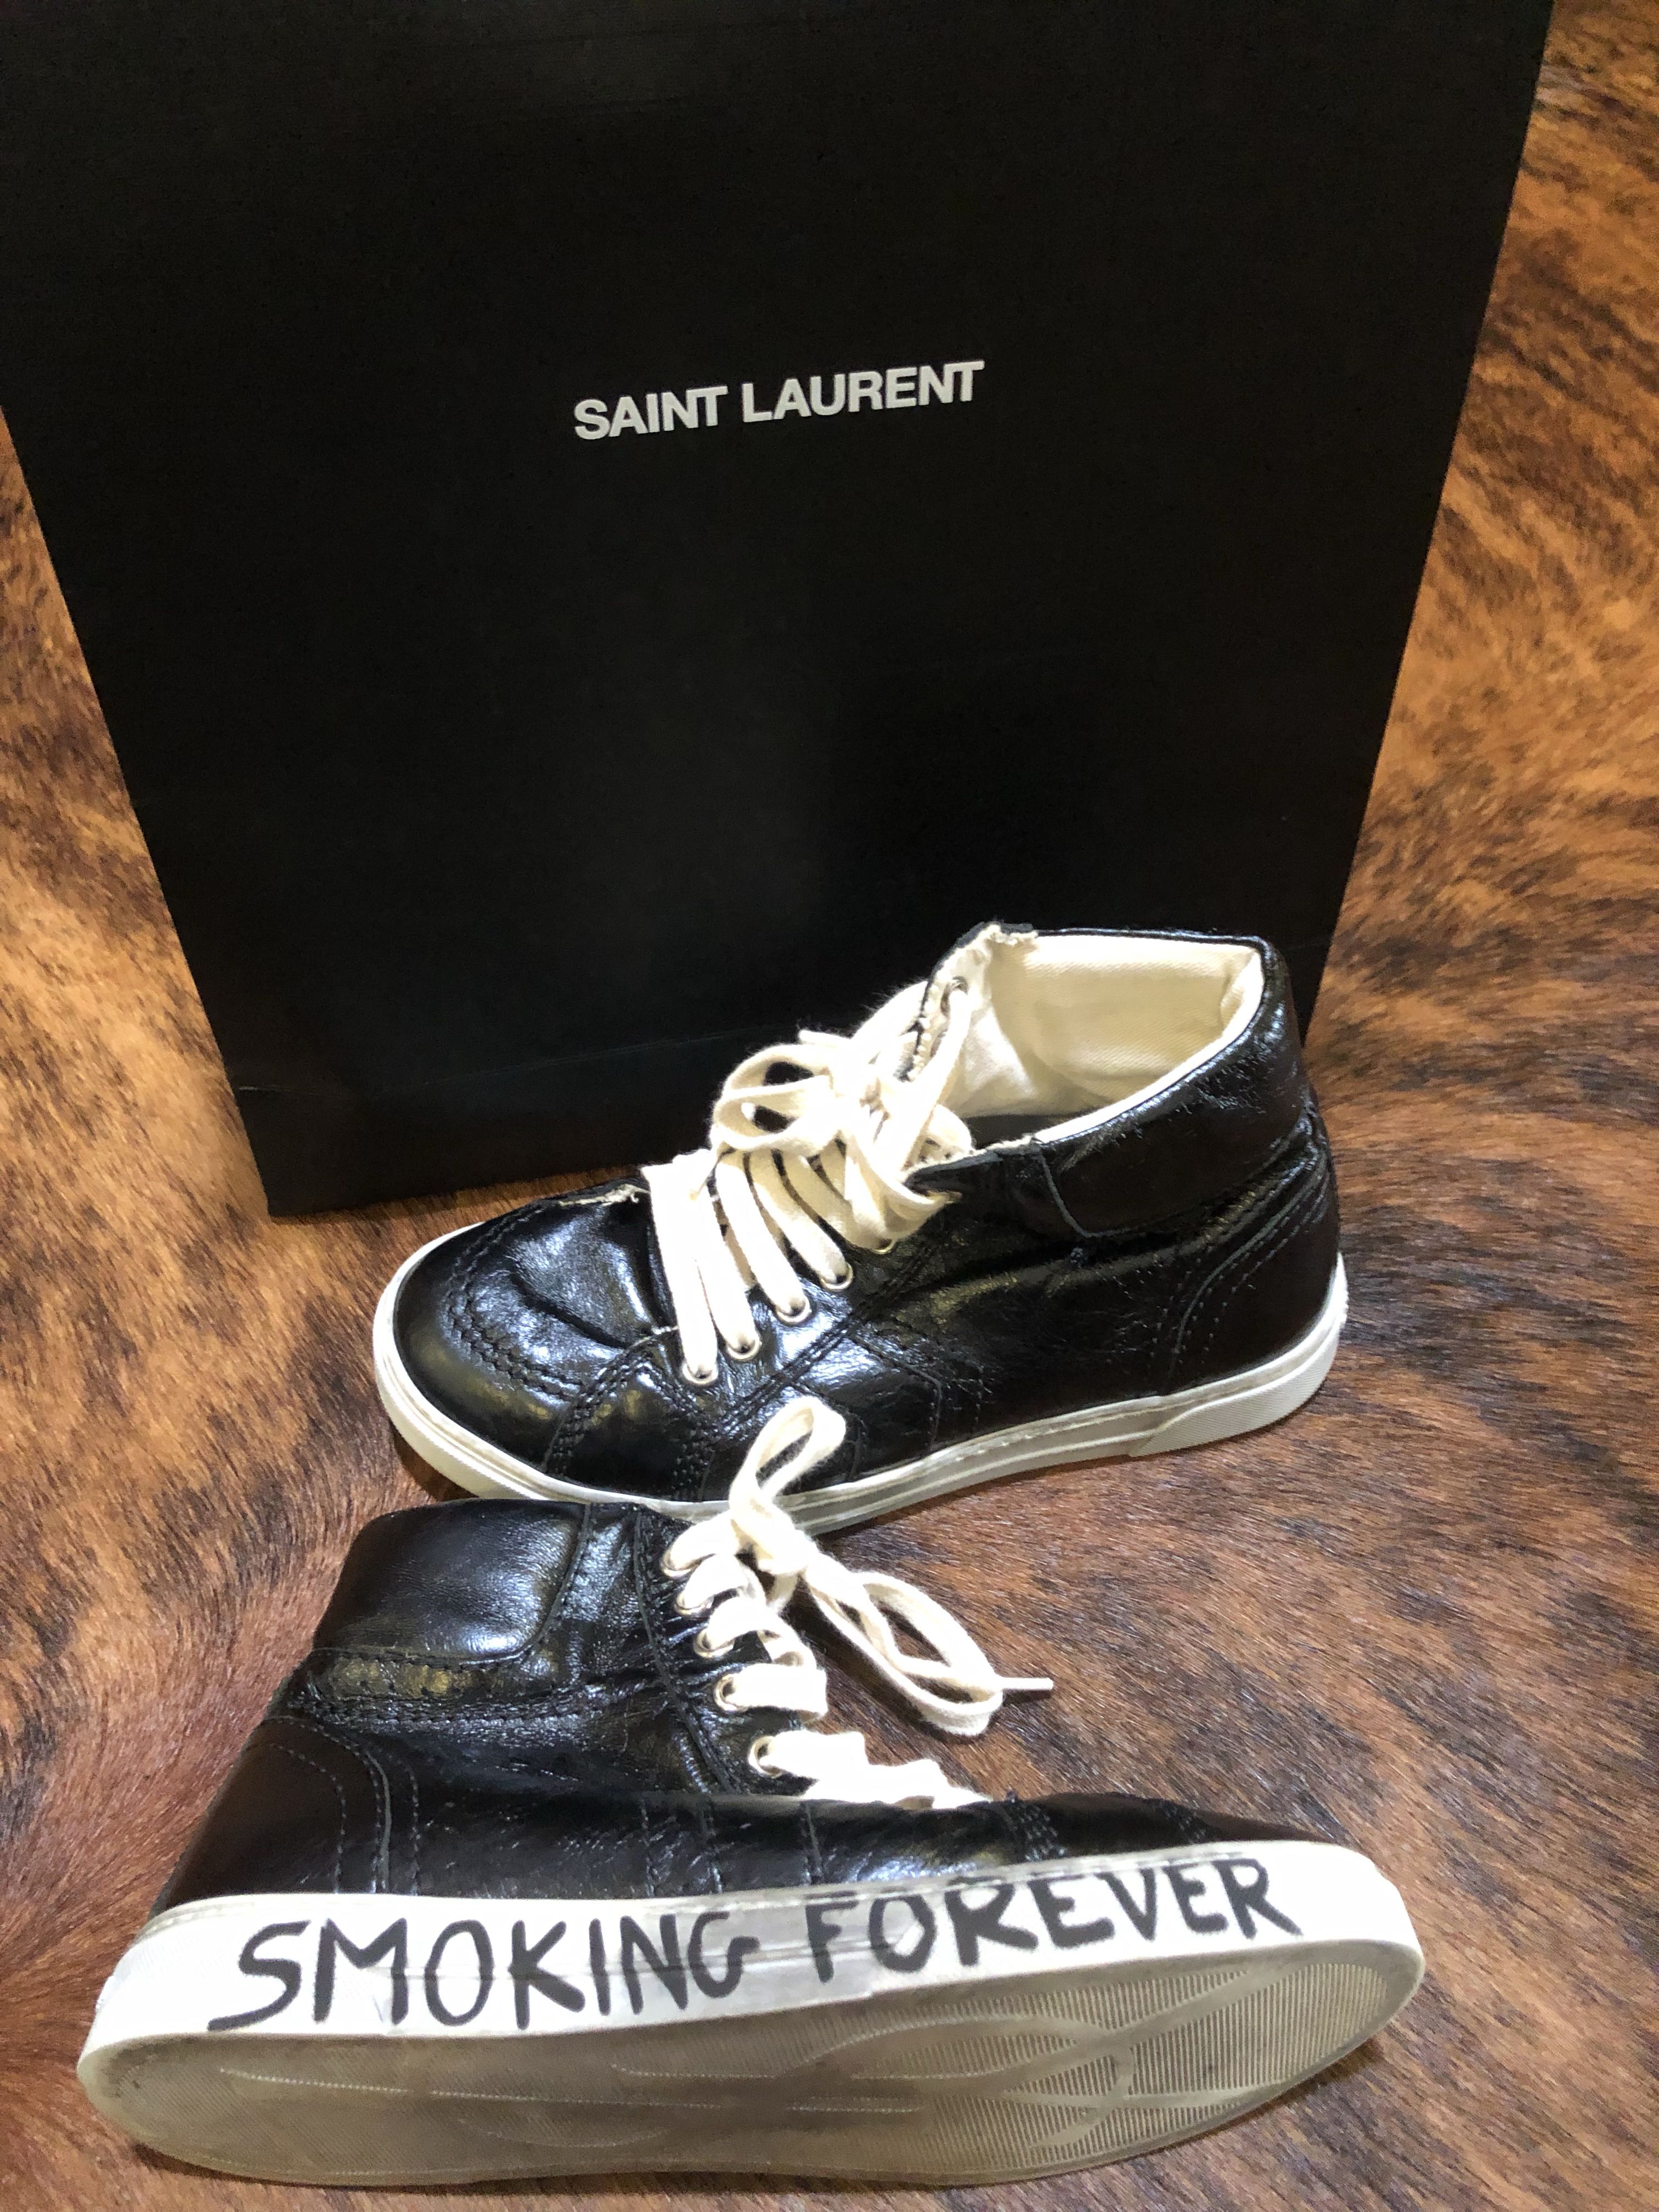 ysl smoking forever shoes